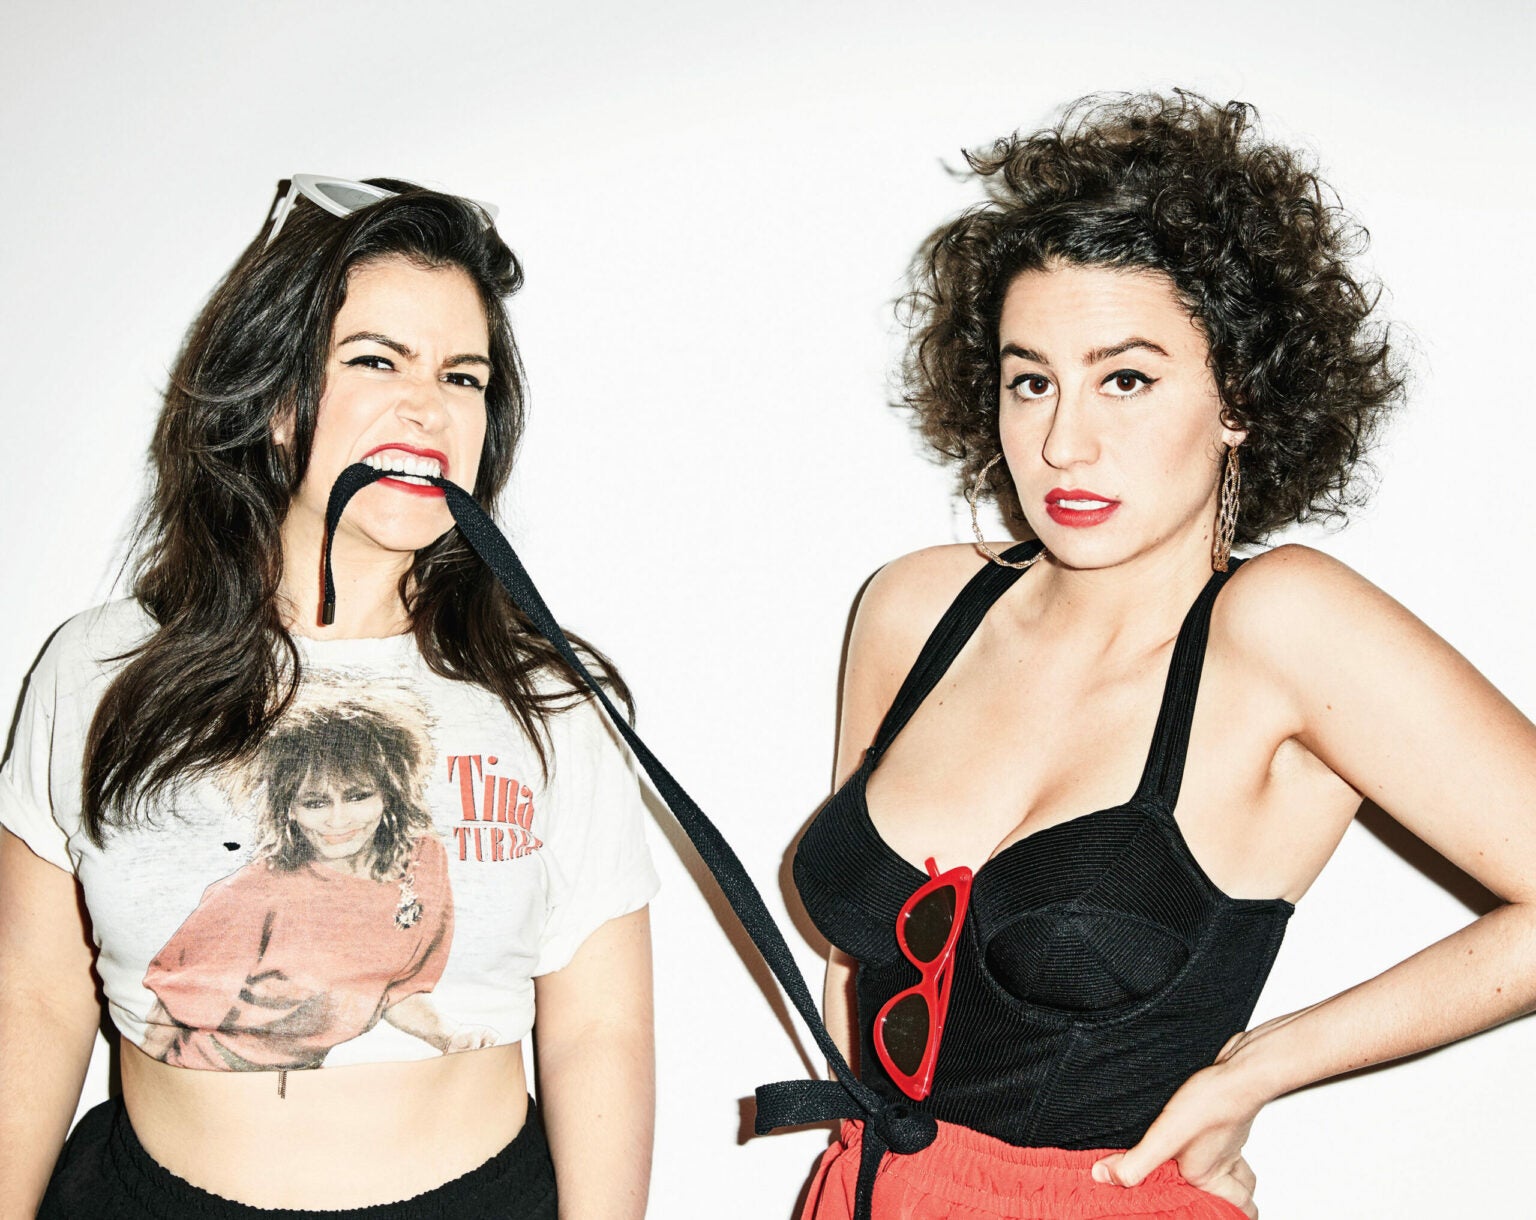 Abbi Jacobson and Ilana Glazer of Broad City for the March issue of Playboy...